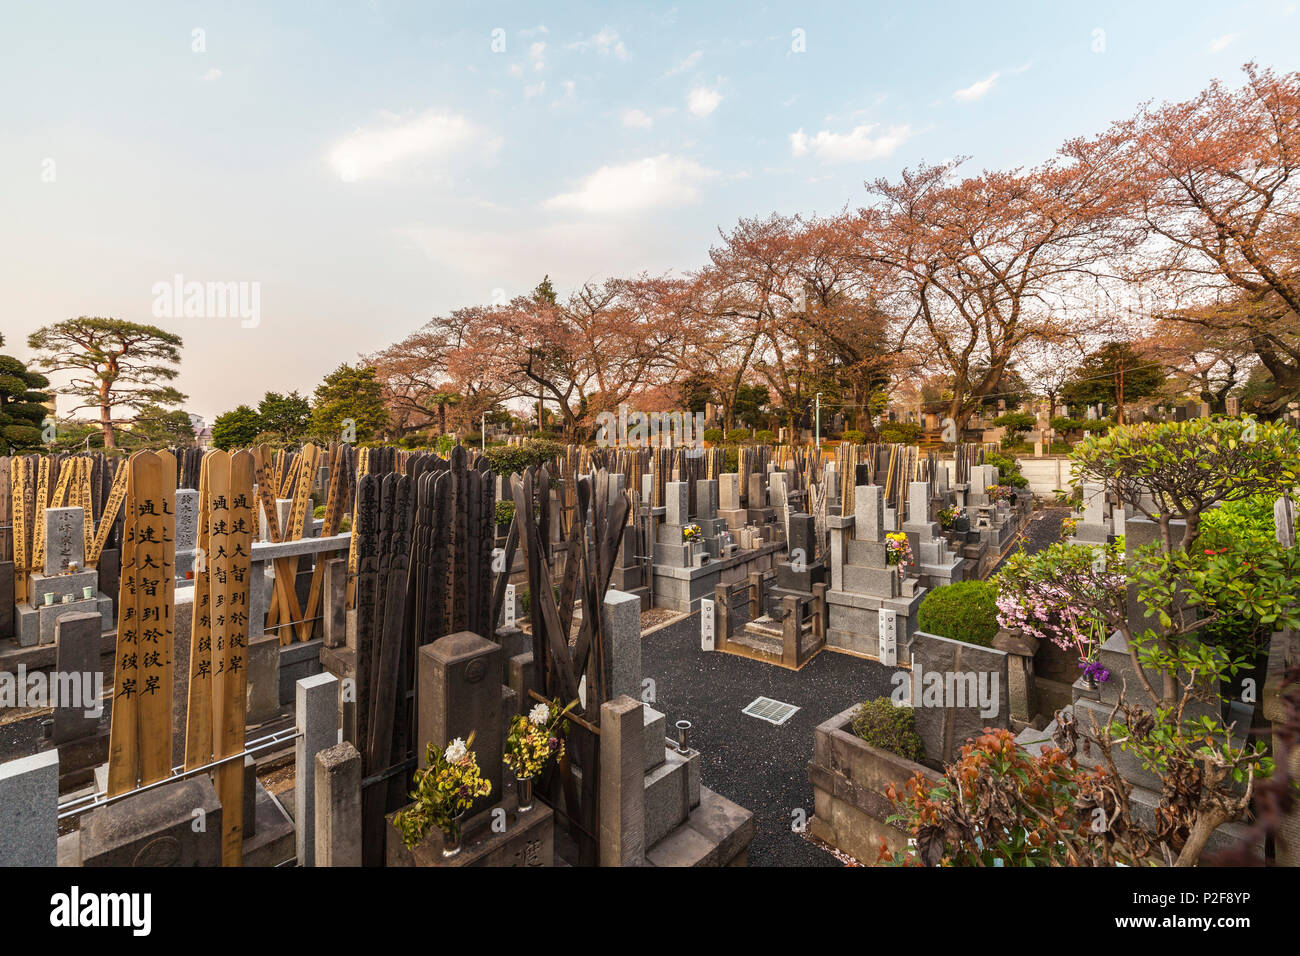 Graves and cherry trees at Somei Cemetery, Komagome, Toshima-ku, Tokyo, Japan Stock Photo